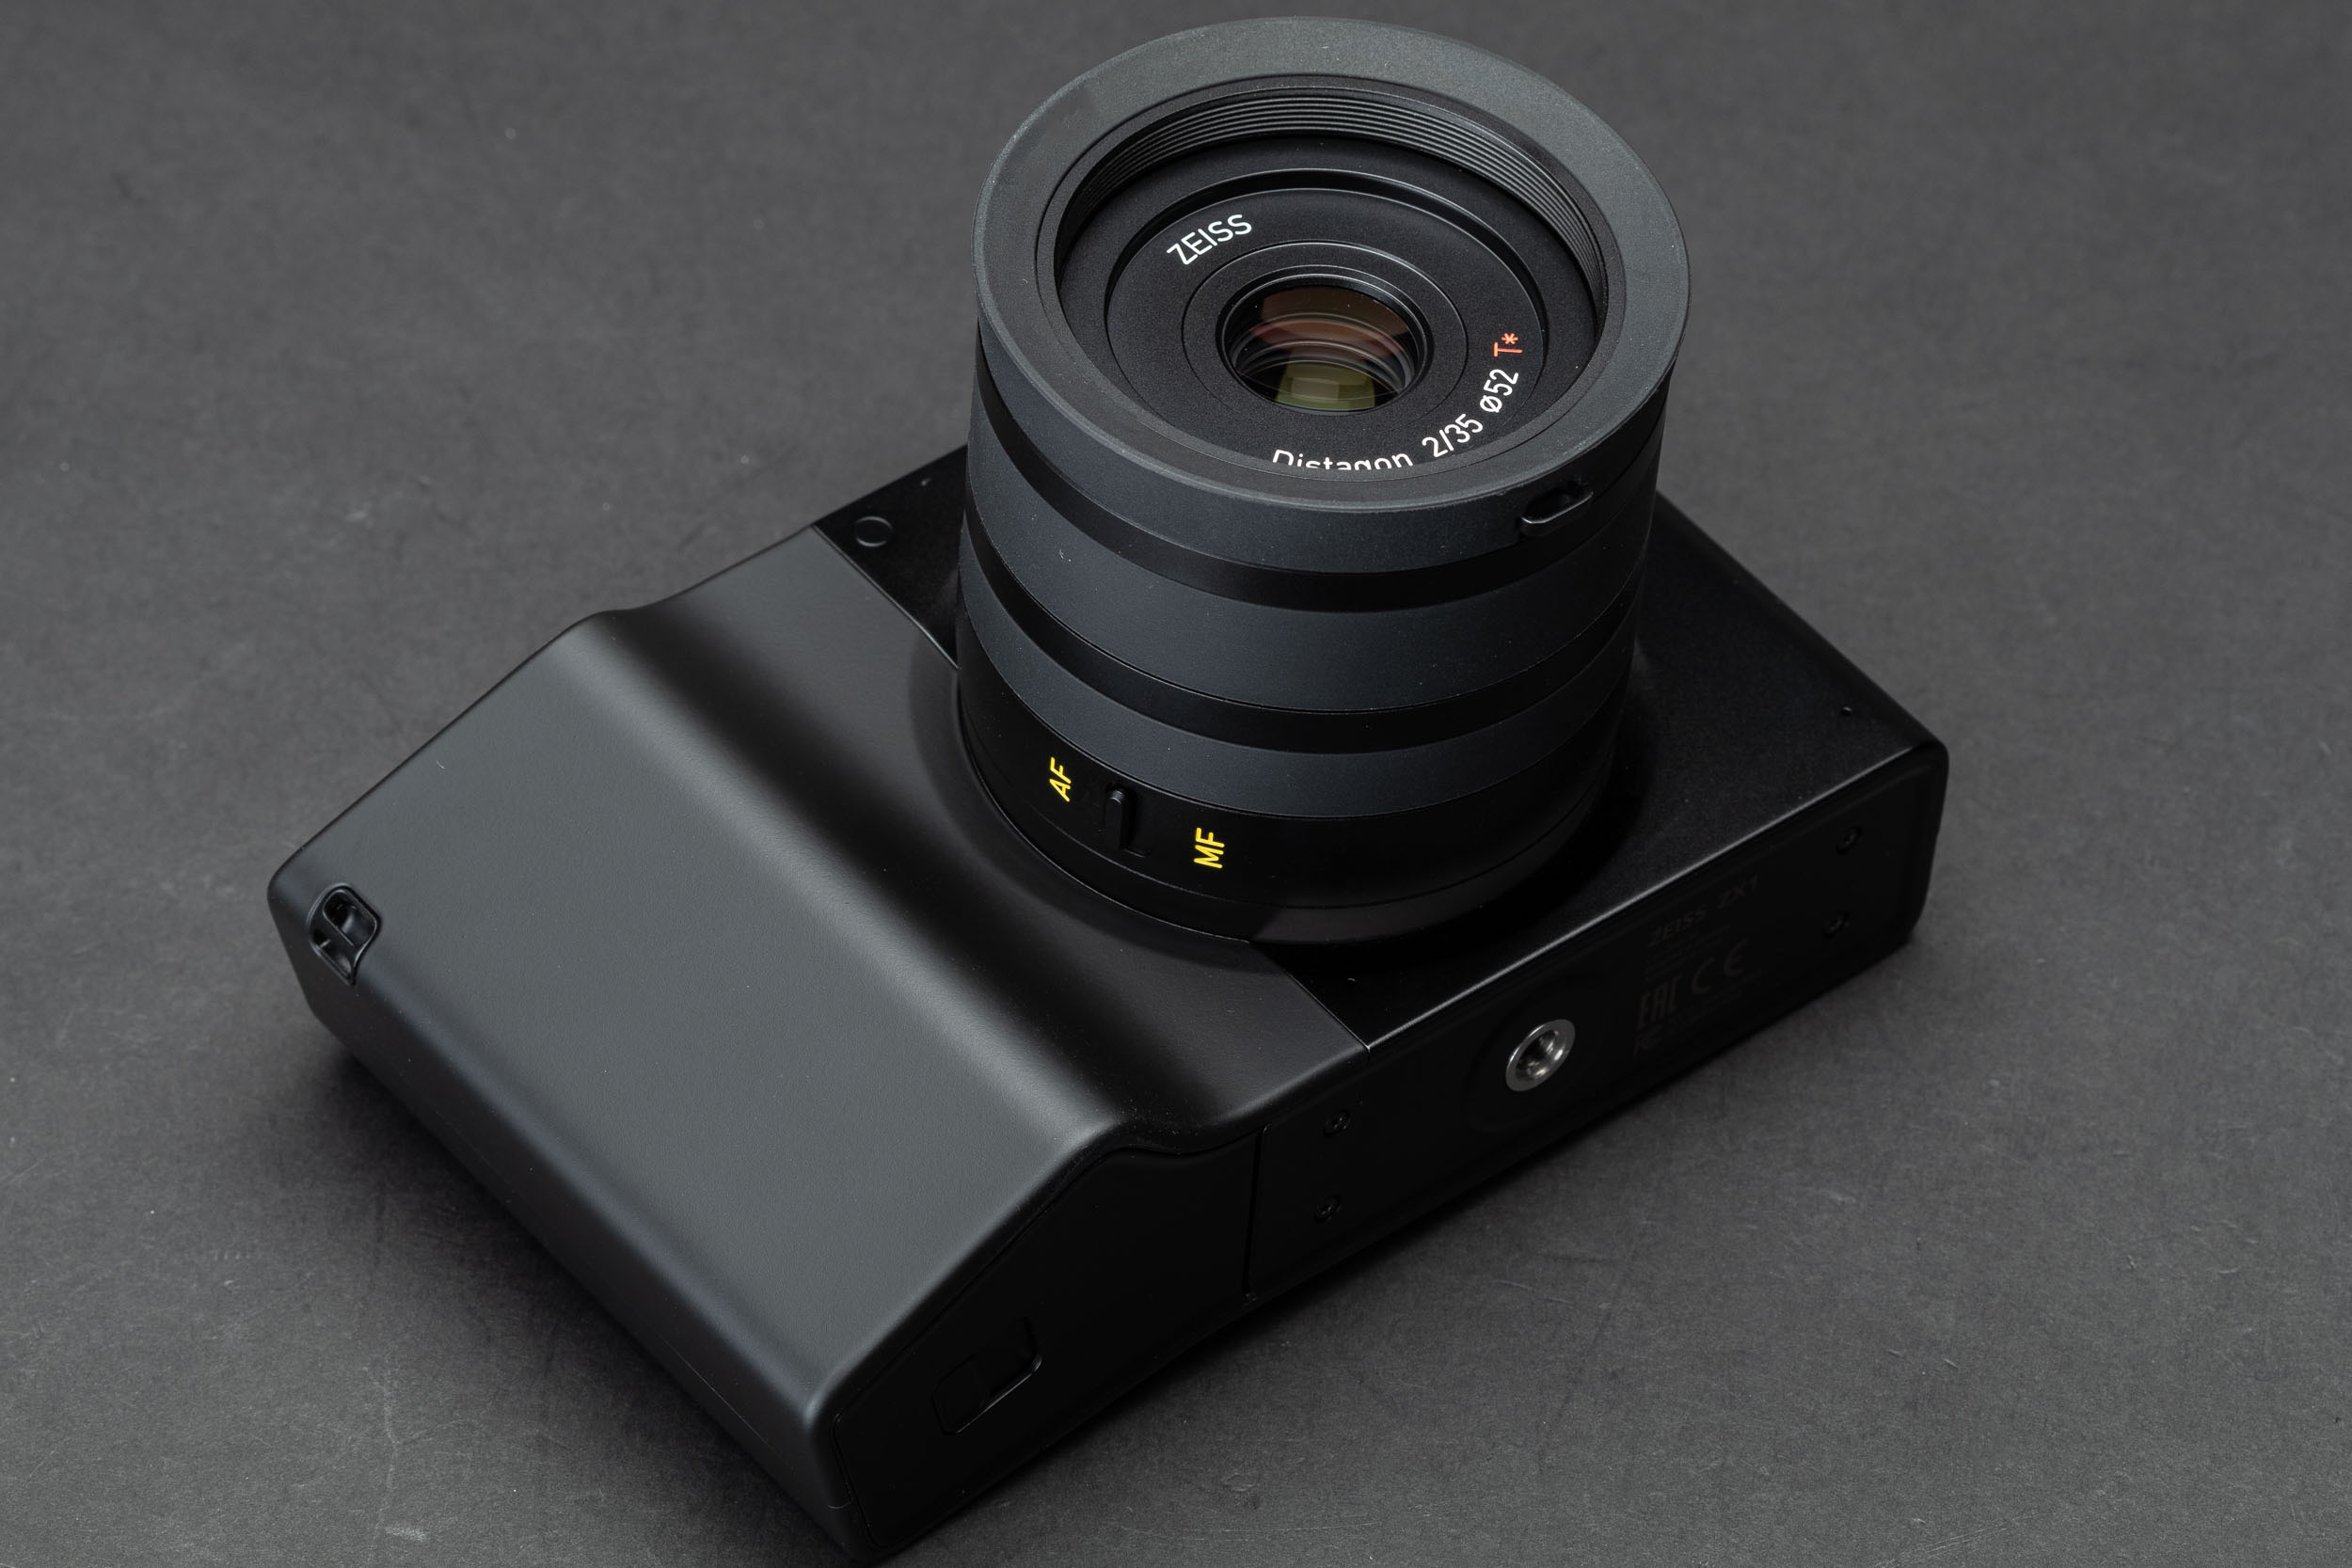 Zeiss' $6K Android-powered ZX1 camera gets face-detection AF, Lightroom update and more in 1.4 firmware update